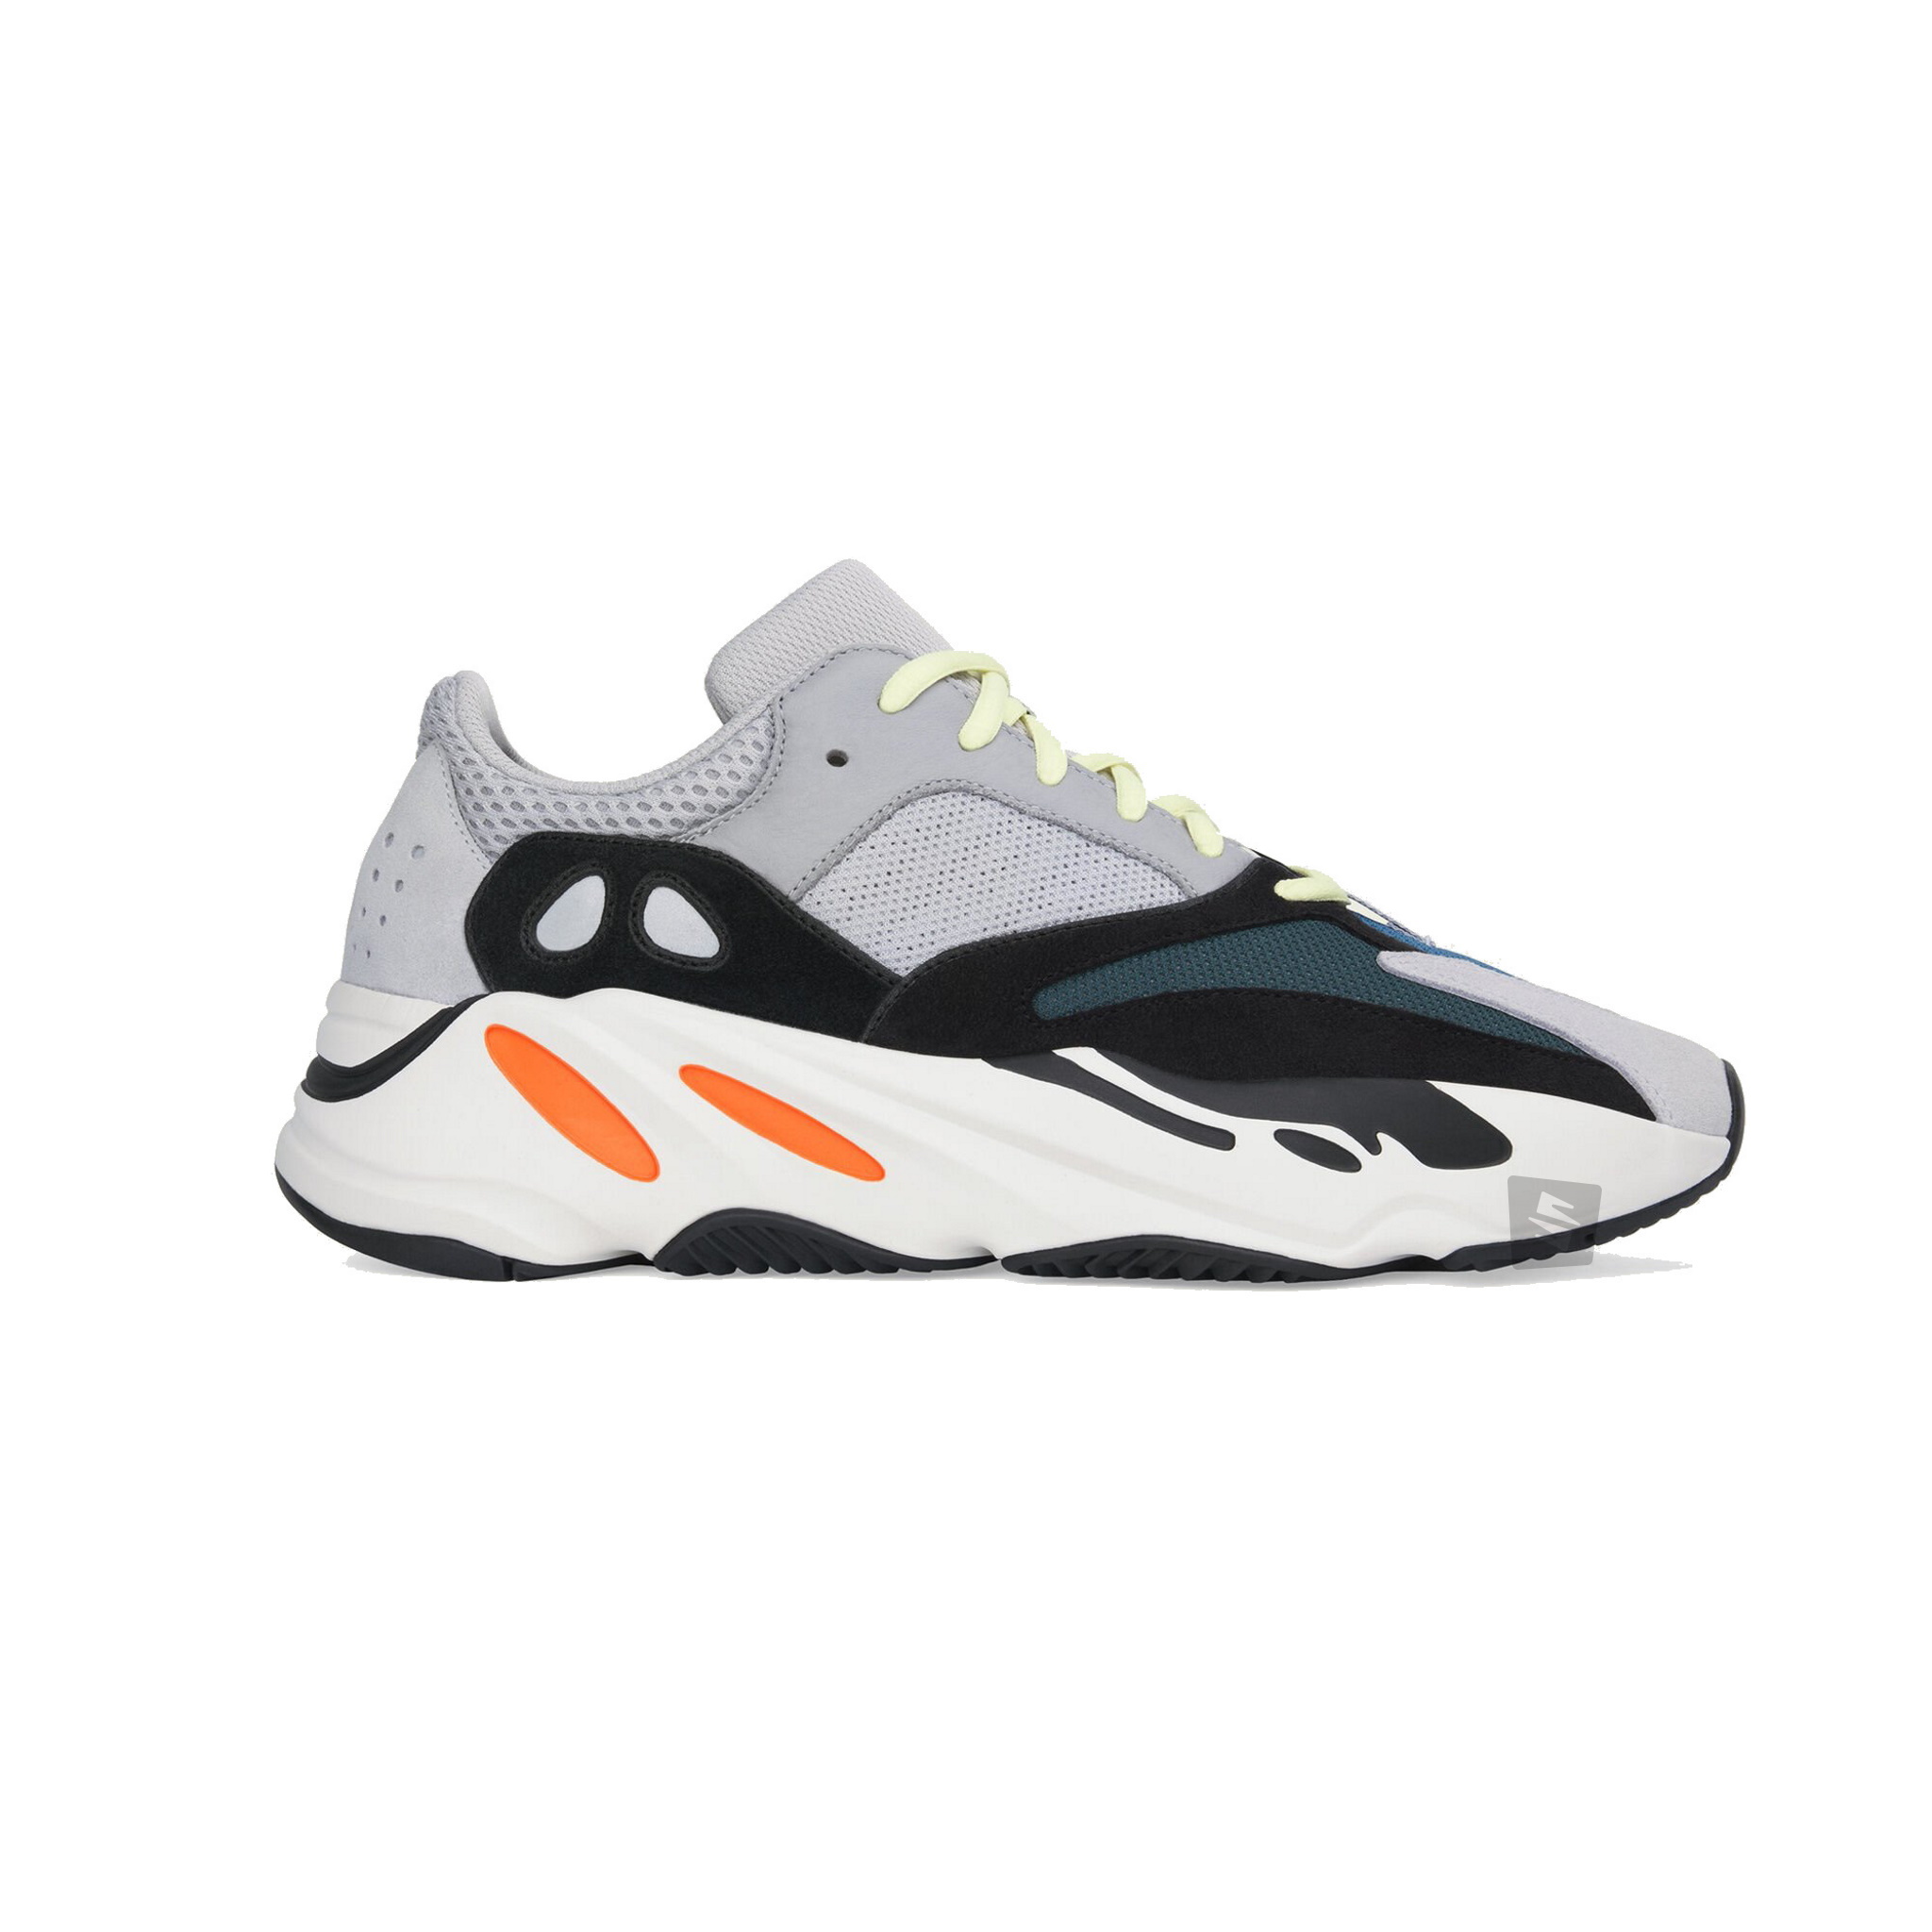 yeezy boost 700 fit guide